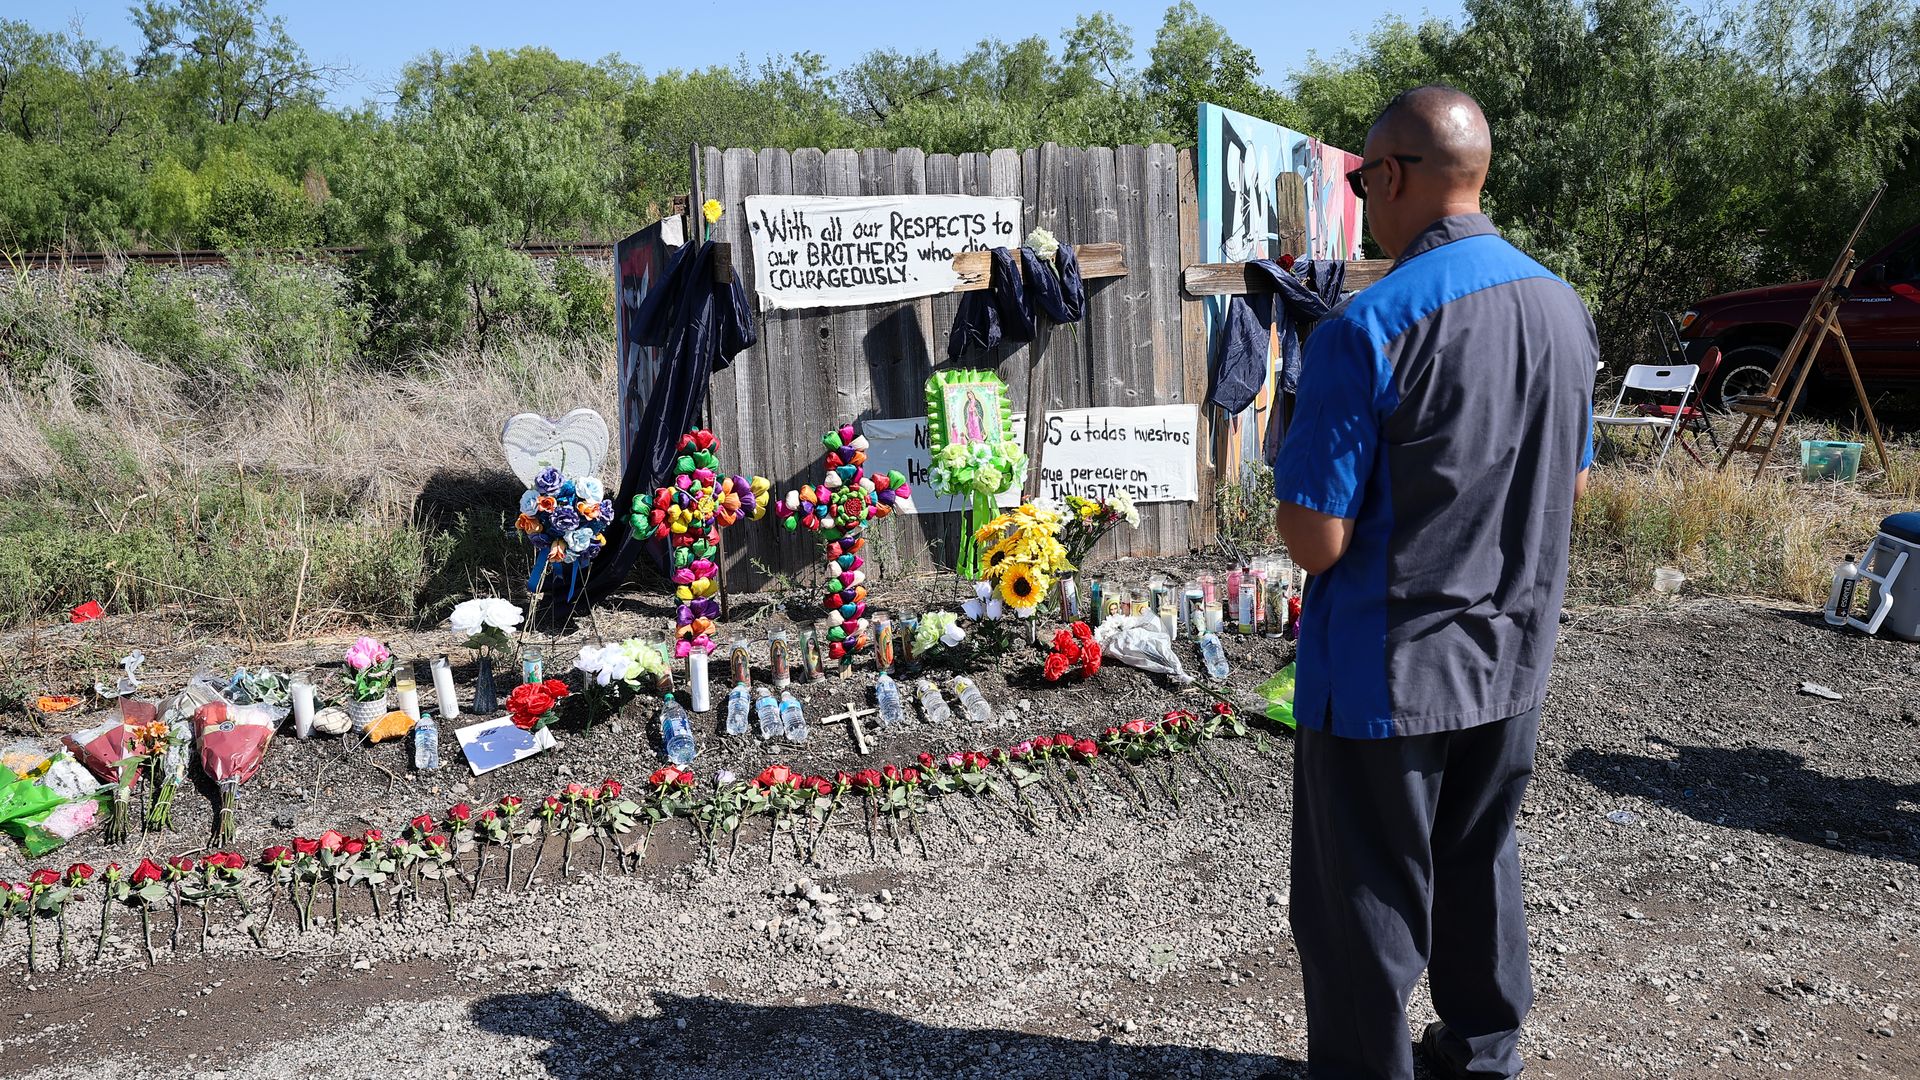 A man stands in front of a makeshift memorial for migrants who died in a smuggling attempt. The memorial includes red roses laid down on the ground, crosses, flowers and signs